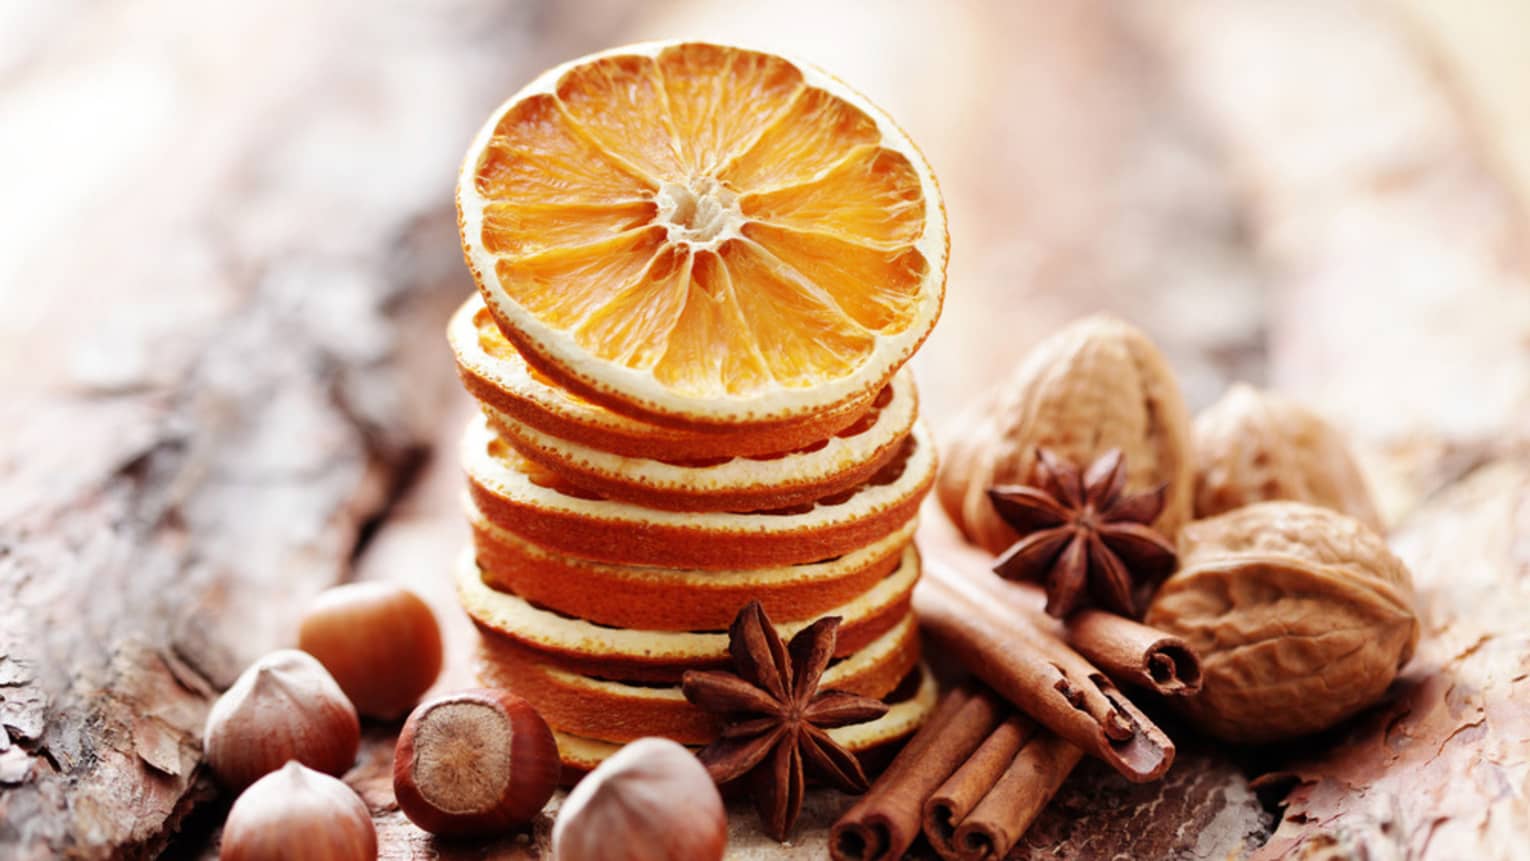 Nuts, spices and orange slices on wood.